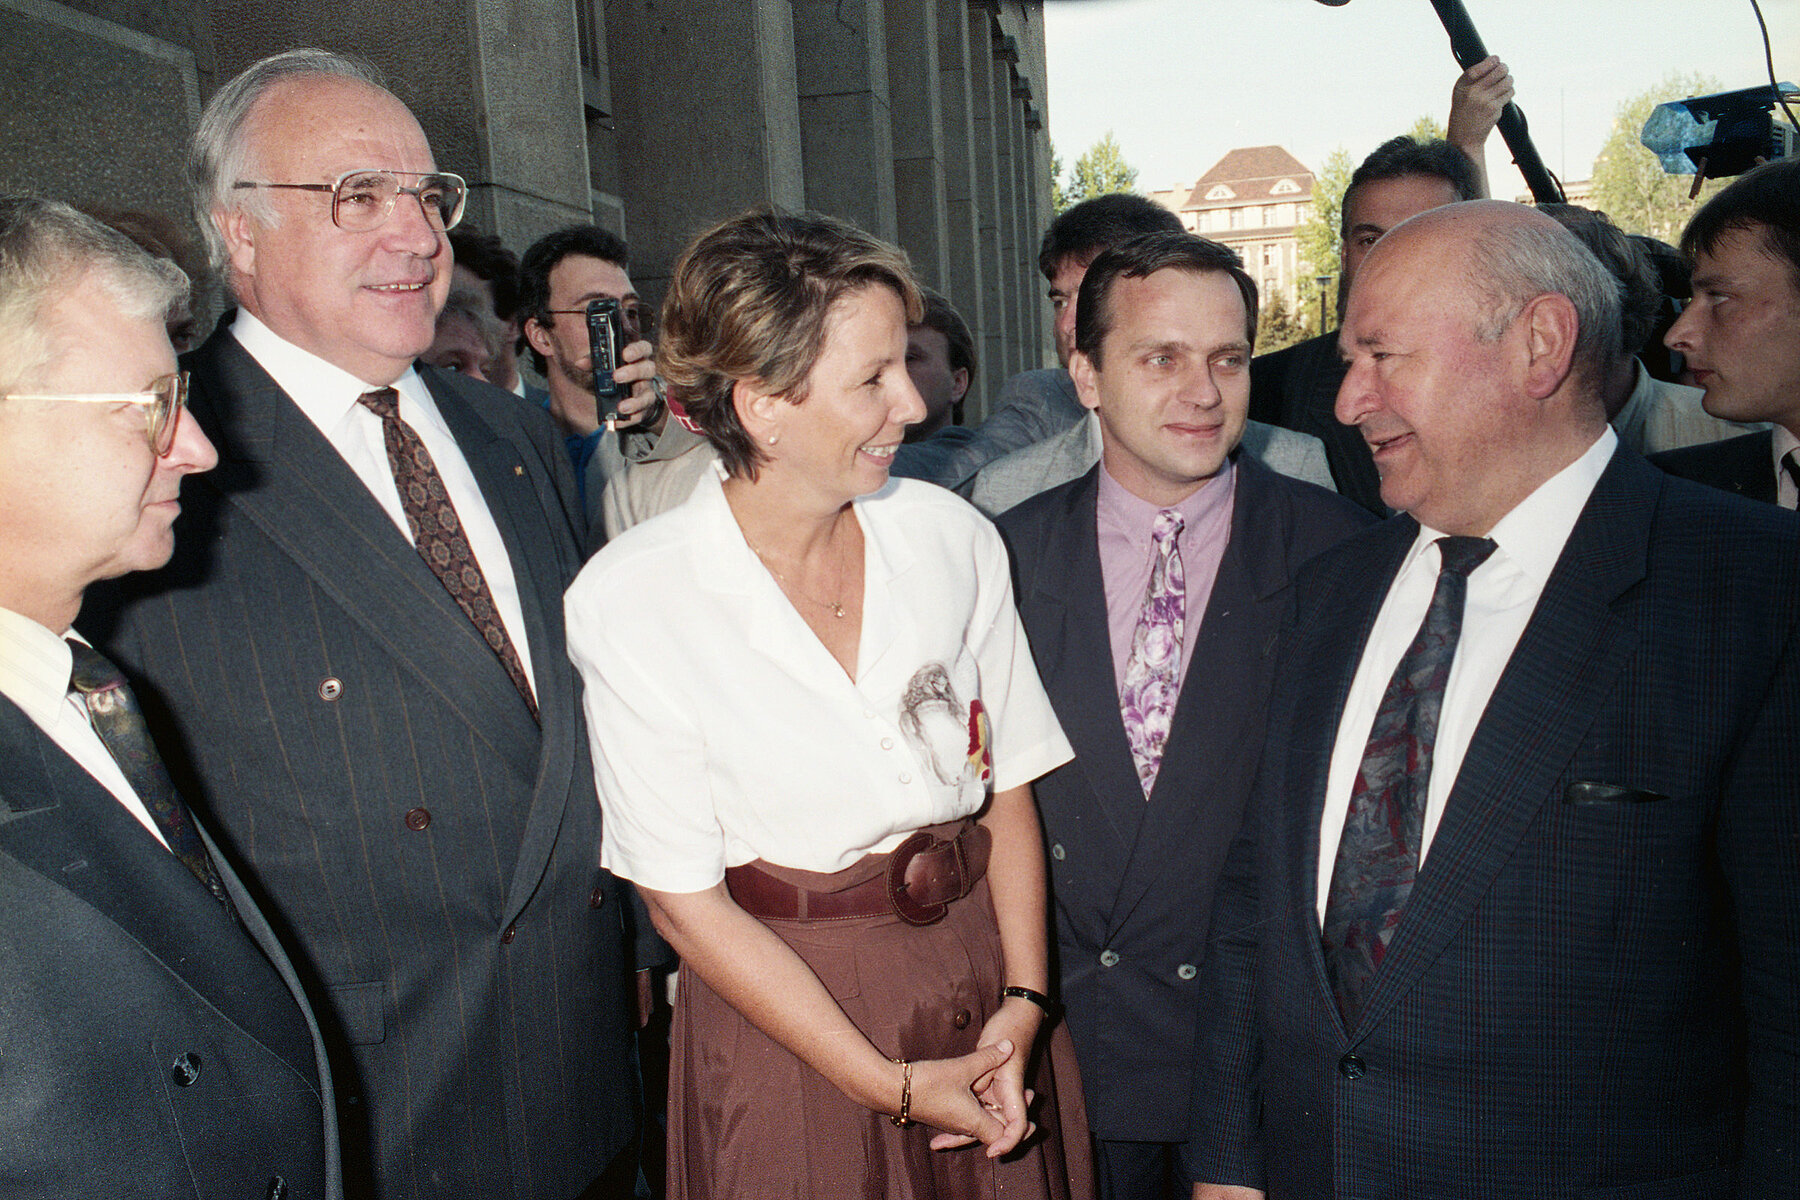 The president of the GDR's Volkskammer, Sabine Bergmann-Pohl, in a white blouse and brown skirt, between four top politicians from Bonn. To the left of her is Chancellor Helmut Kohl.